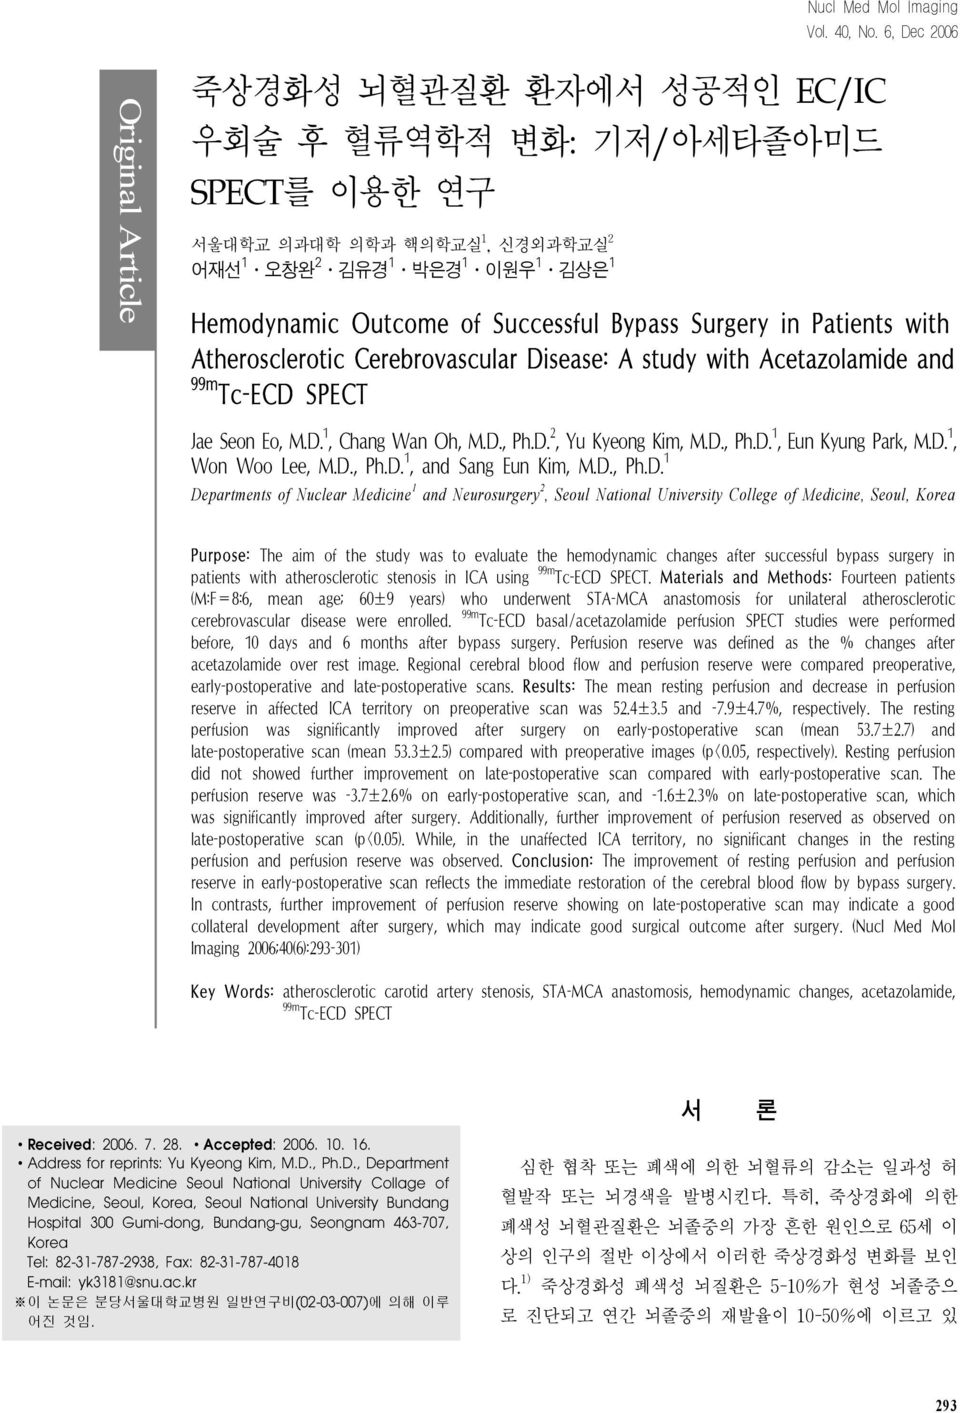 in Patients with Atherosclerotic Cerebrovascular Disease: A study with Acetazolamide and 99m Tc-ECD SPECT Jae Seon Eo, M.D. 1, Chang Wan Oh, M.D., Ph.D. 2, Yu Kyeong Kim, M.D., Ph.D. 1, Eun Kyung Park, M.